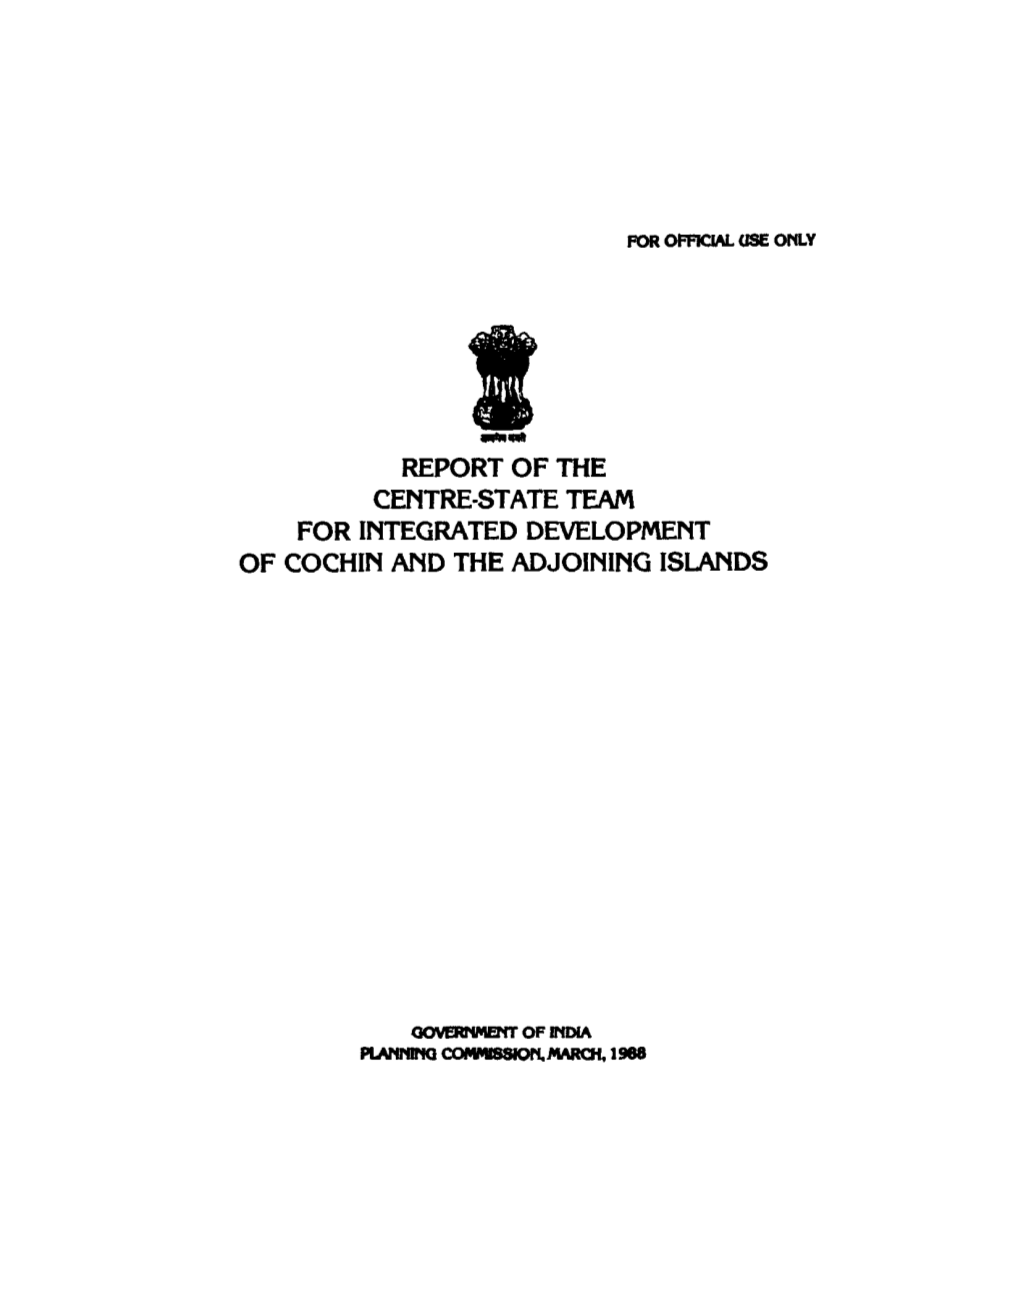 Report of the Centre-State Team for Integrated Development of Cochin and the Adjoining Islands